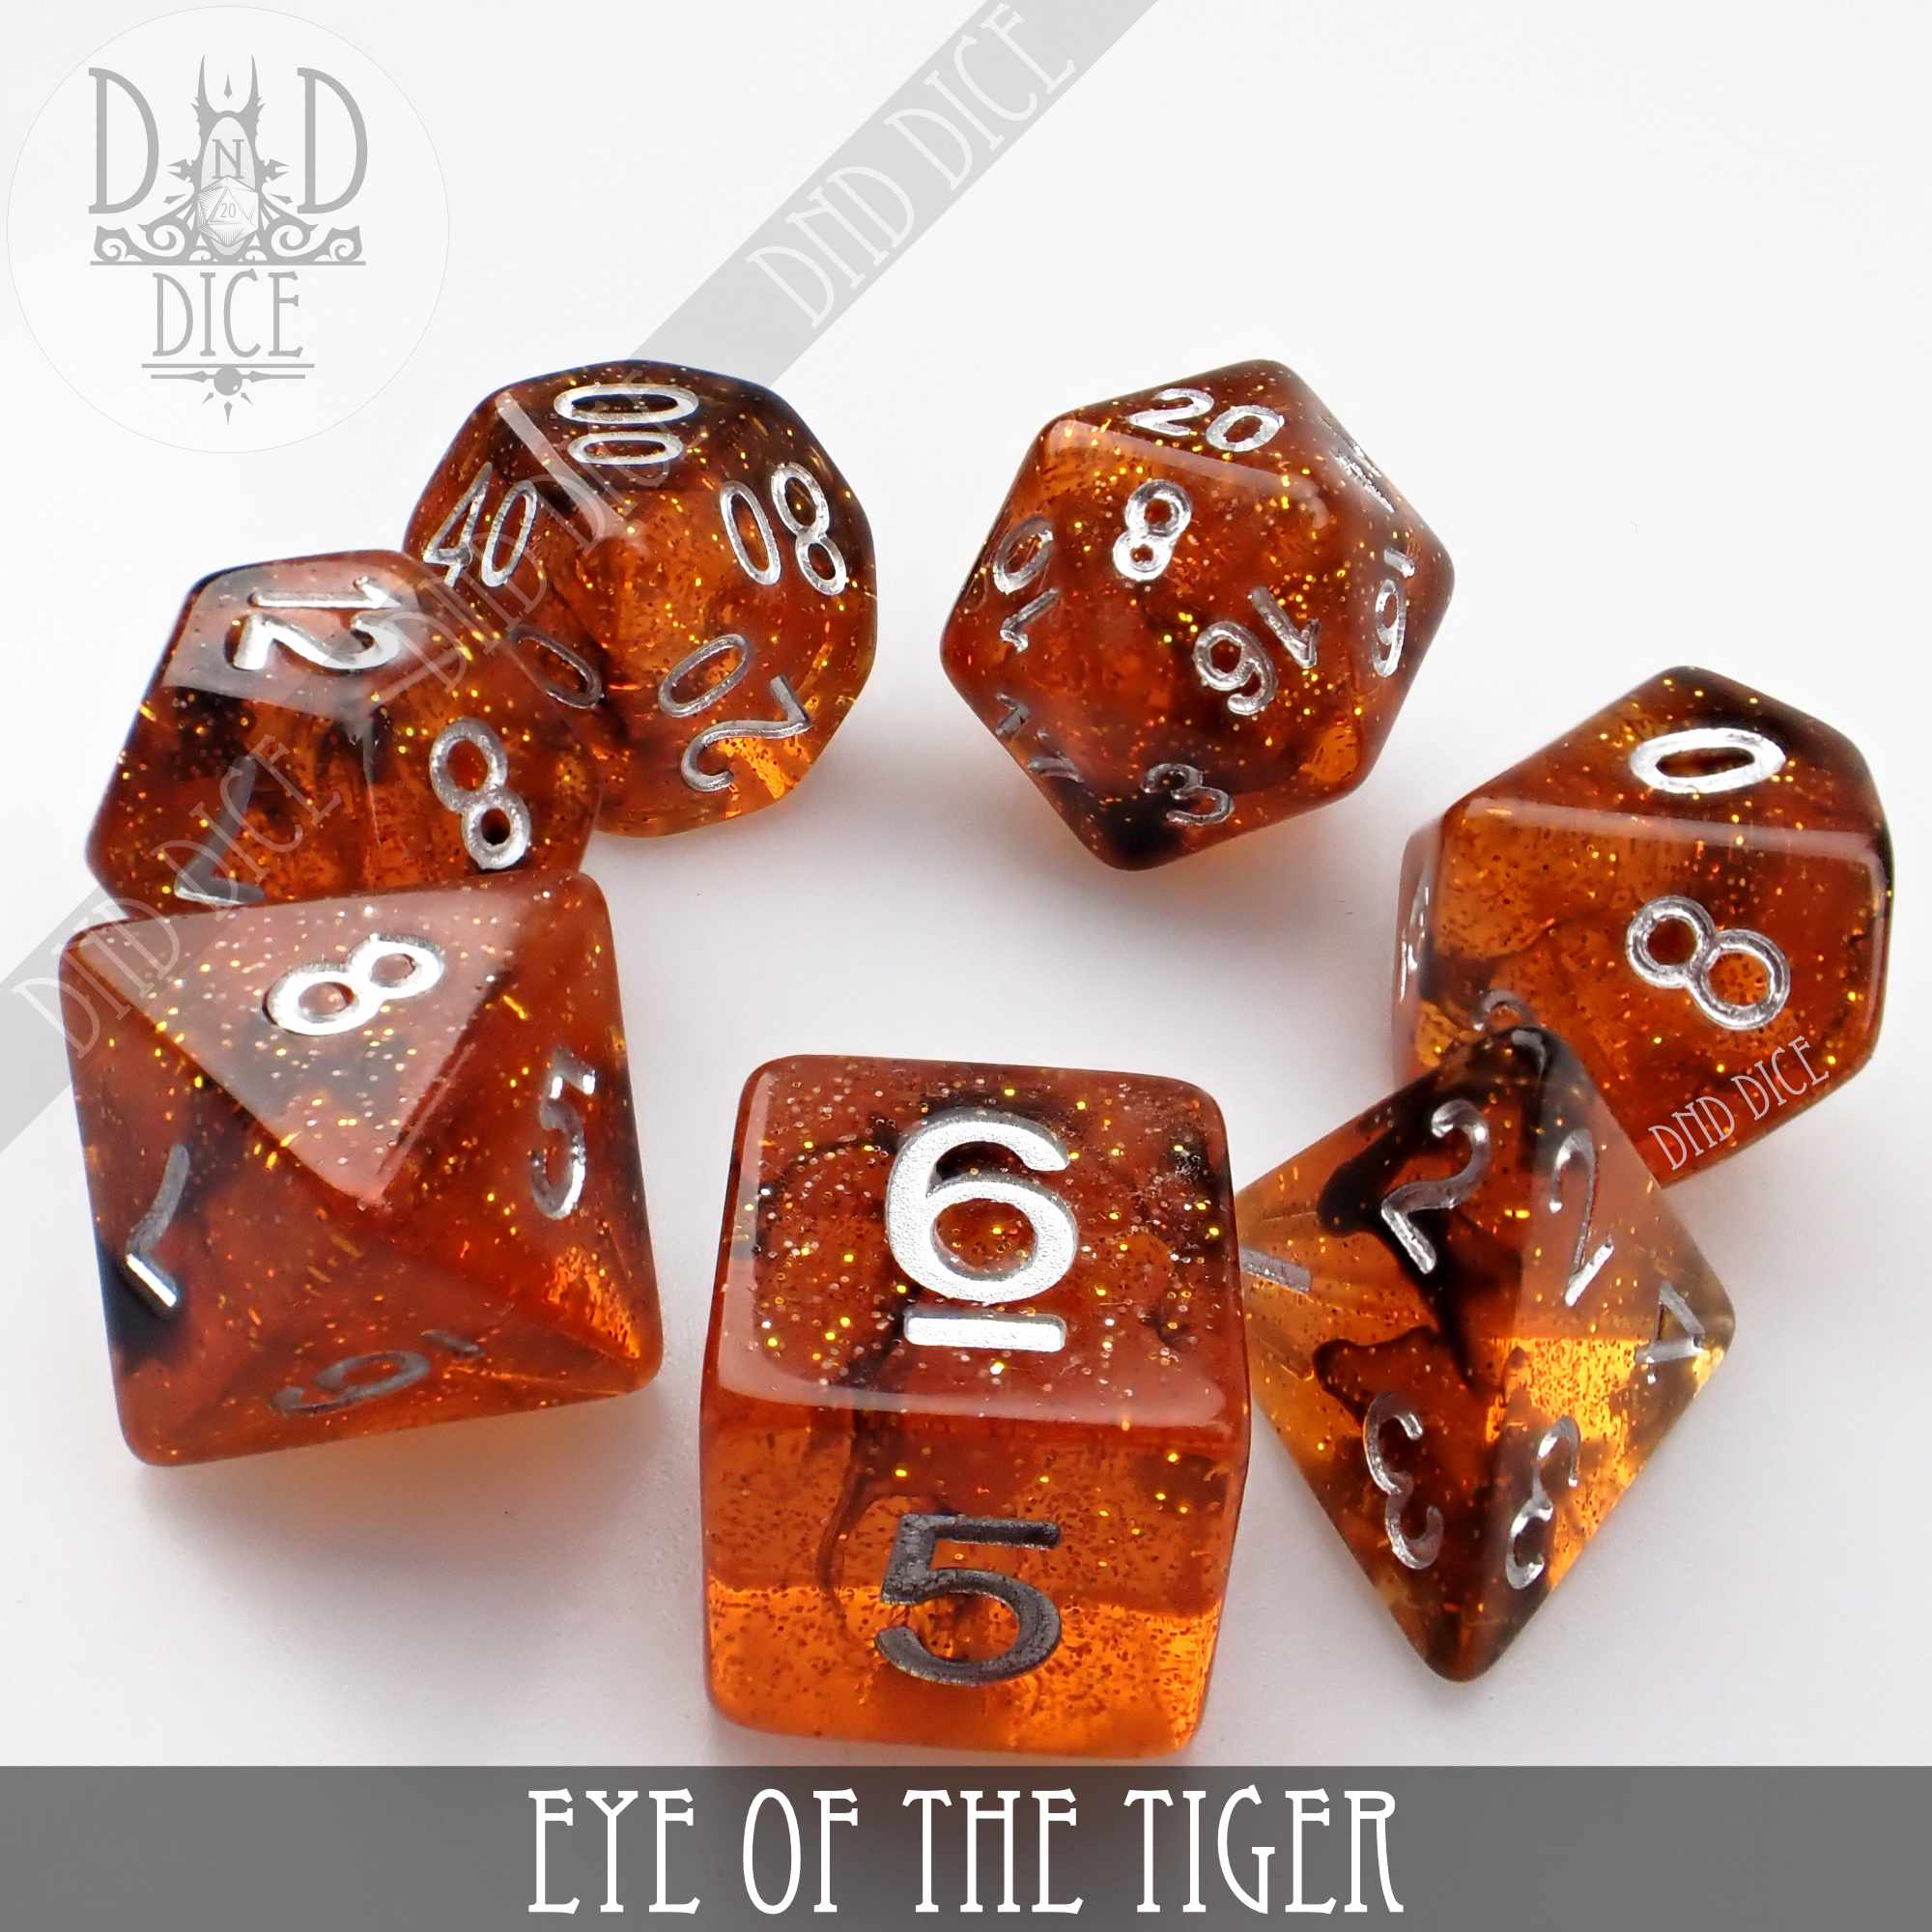 Eye of the Tiger Dice Set